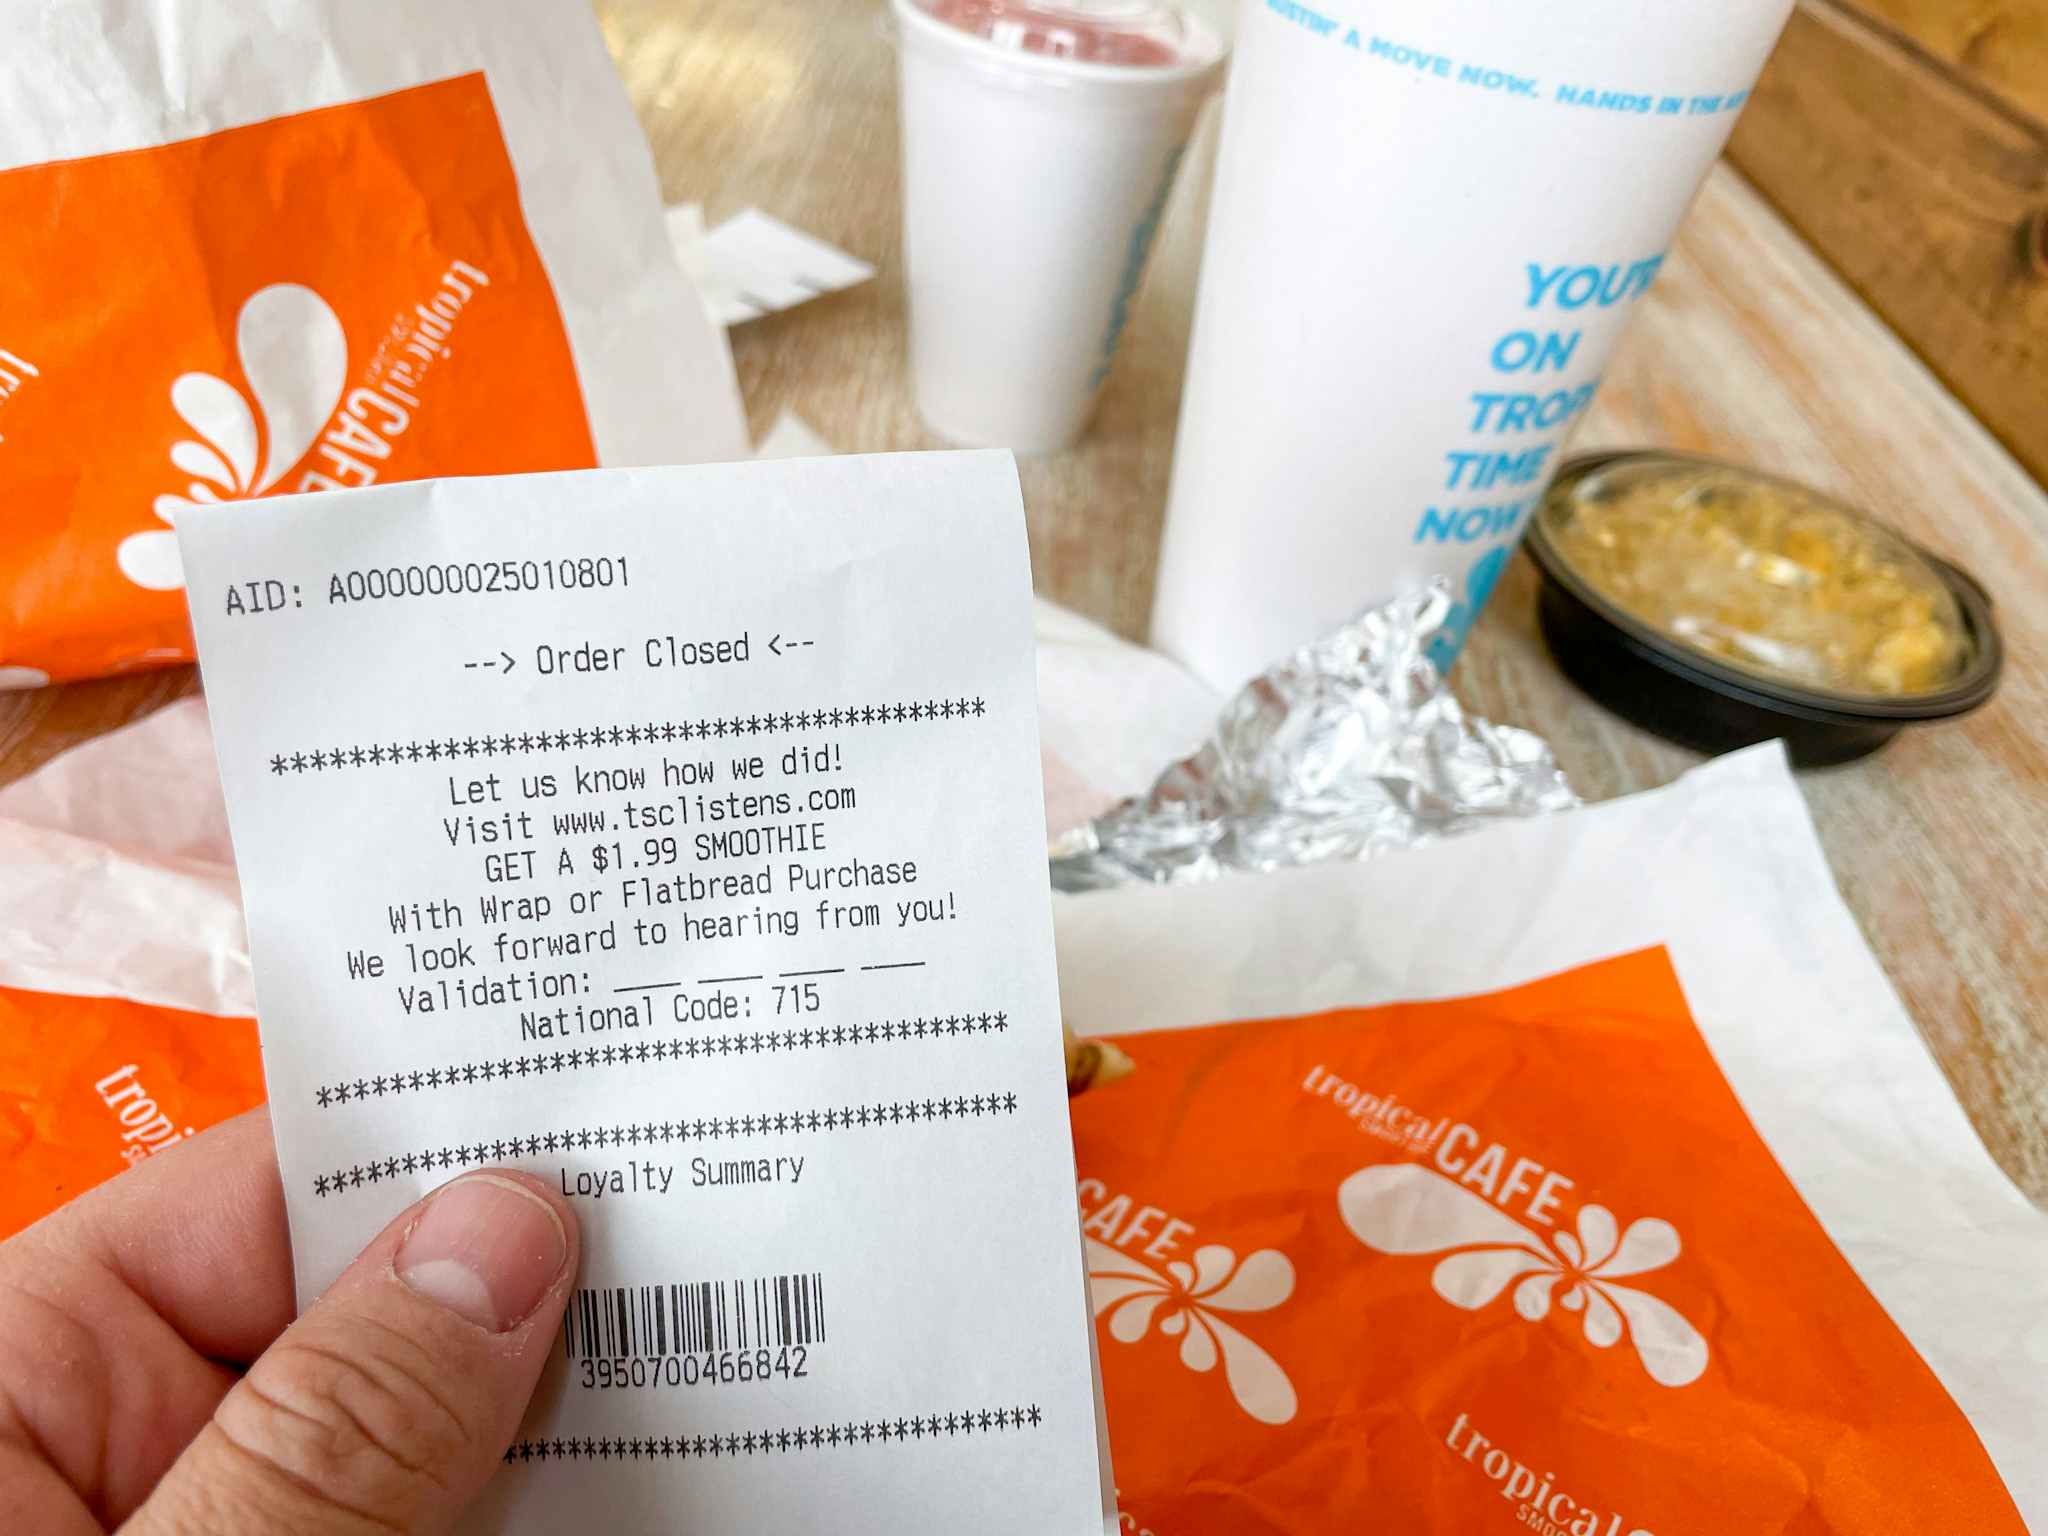 A person holding a Tropical Cafe smoothie receipt.